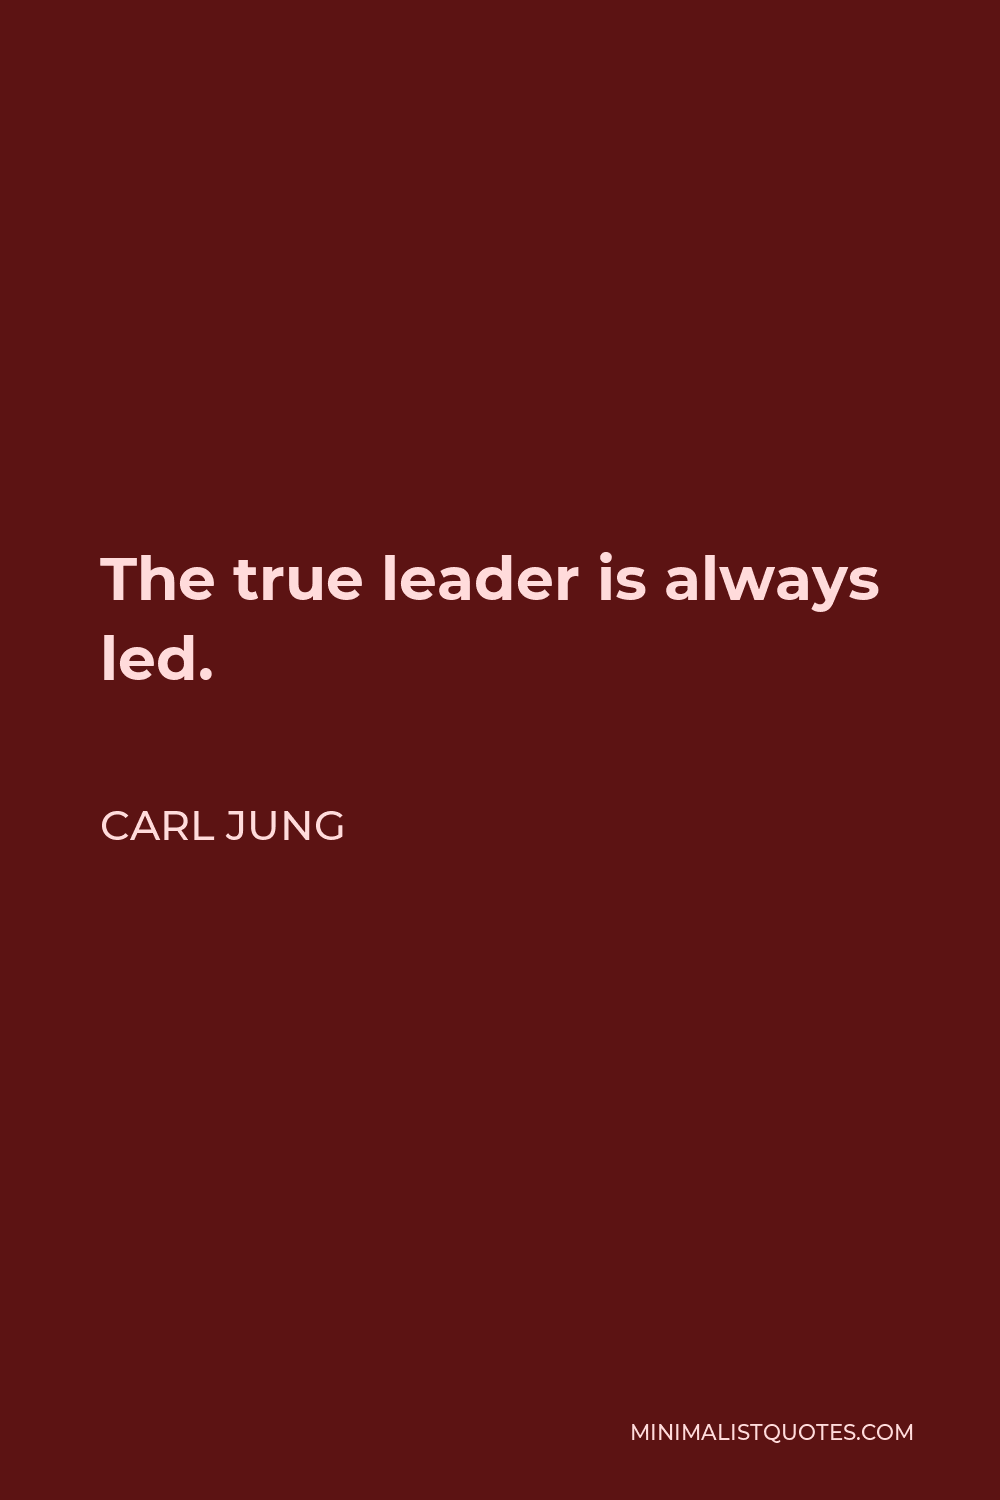 Carl Jung Quote - The true leader is always led.